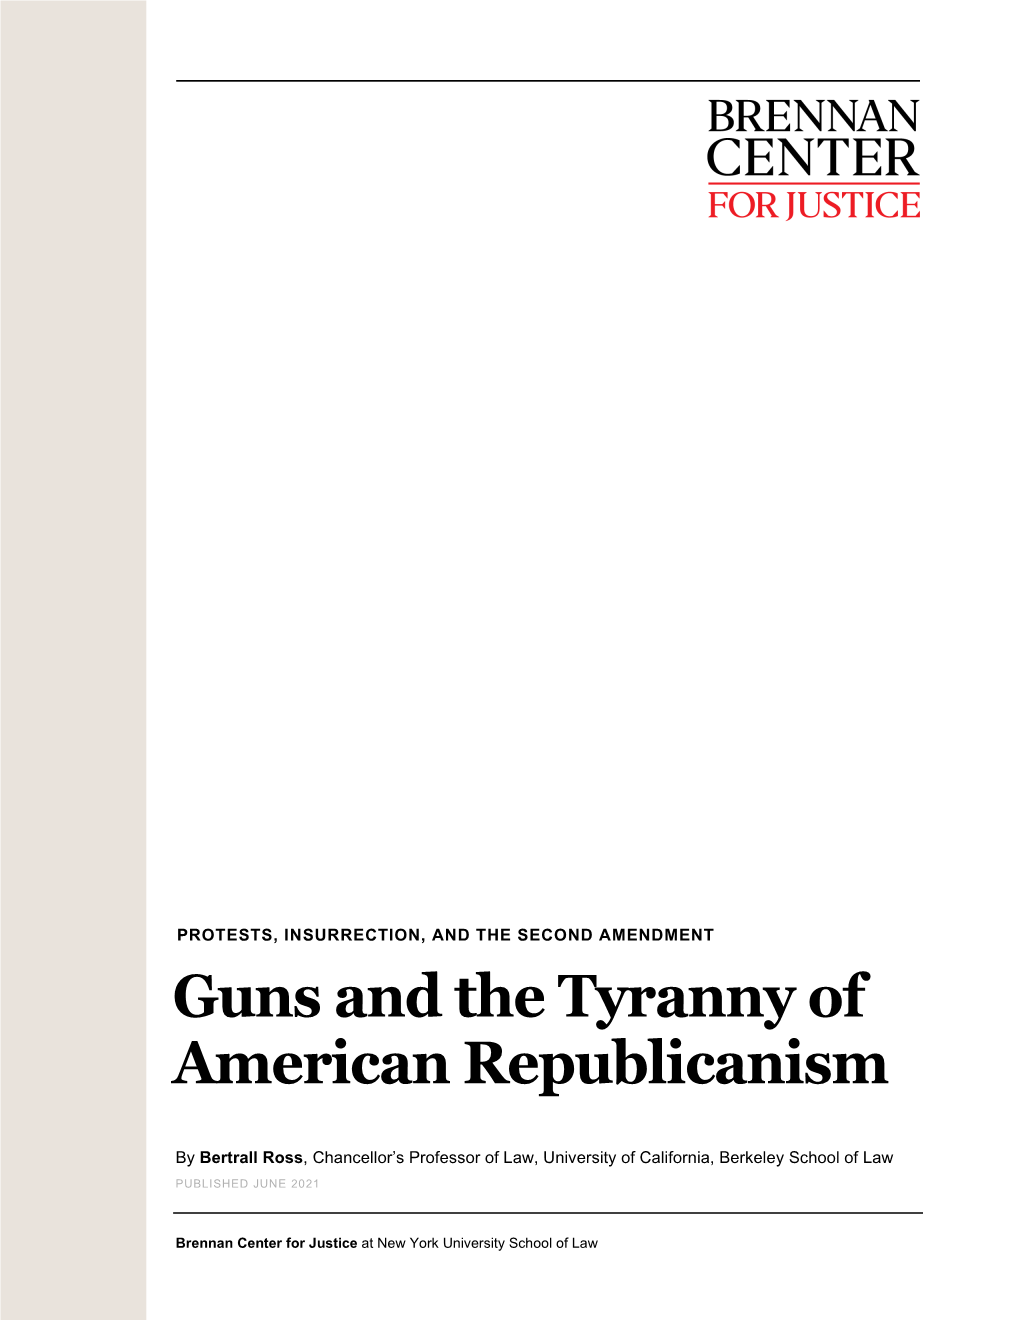 Guns and the Tyranny of American Republicanism